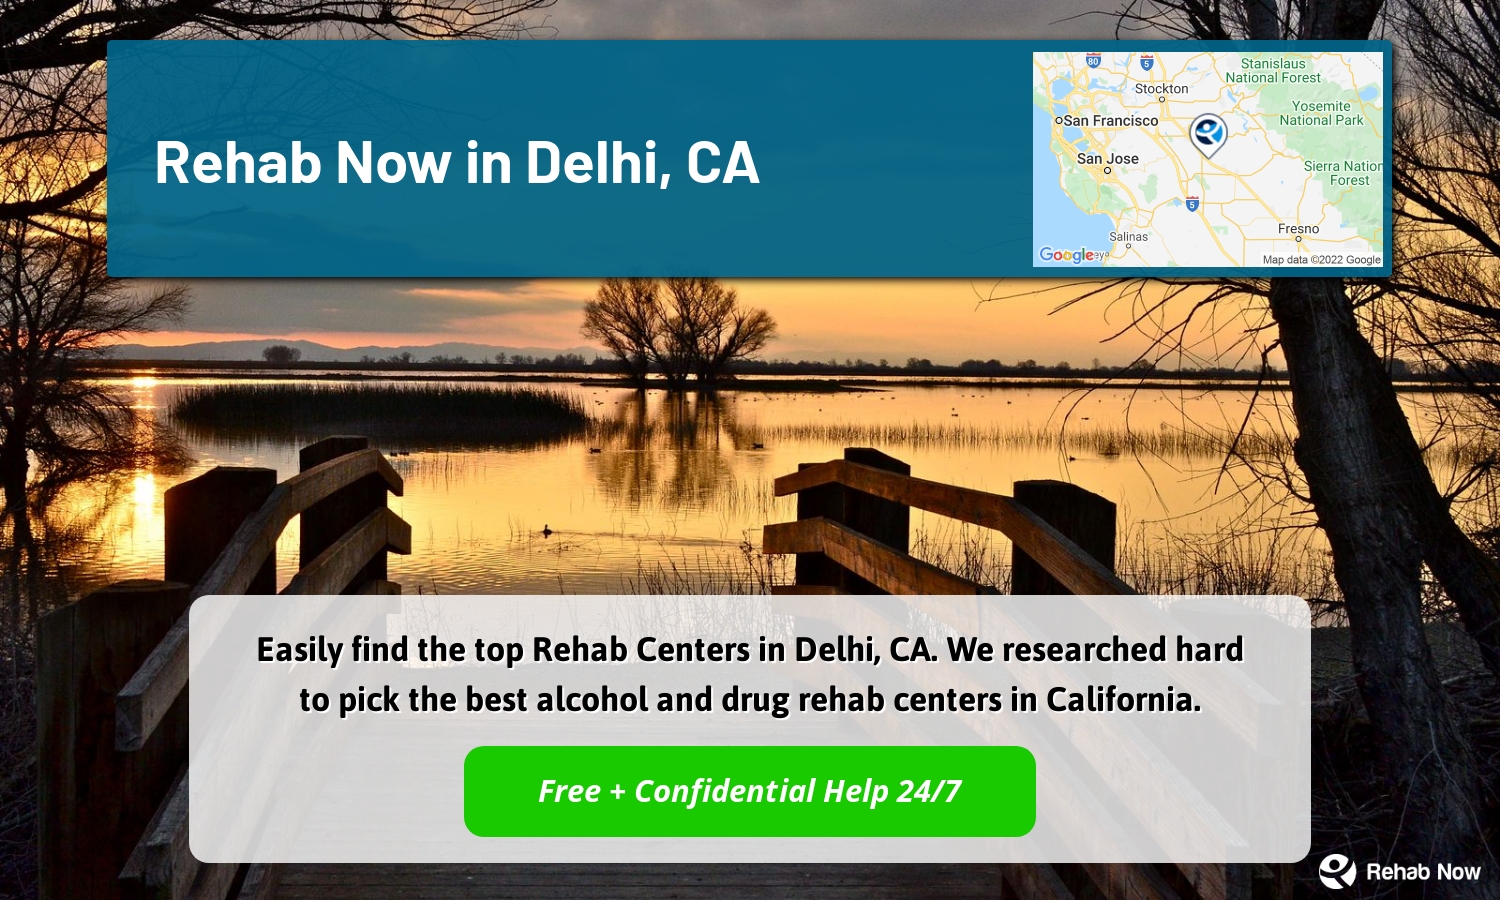 Easily find the top Rehab Centers in Delhi, CA. We researched hard to pick the best alcohol and drug rehab centers in California.